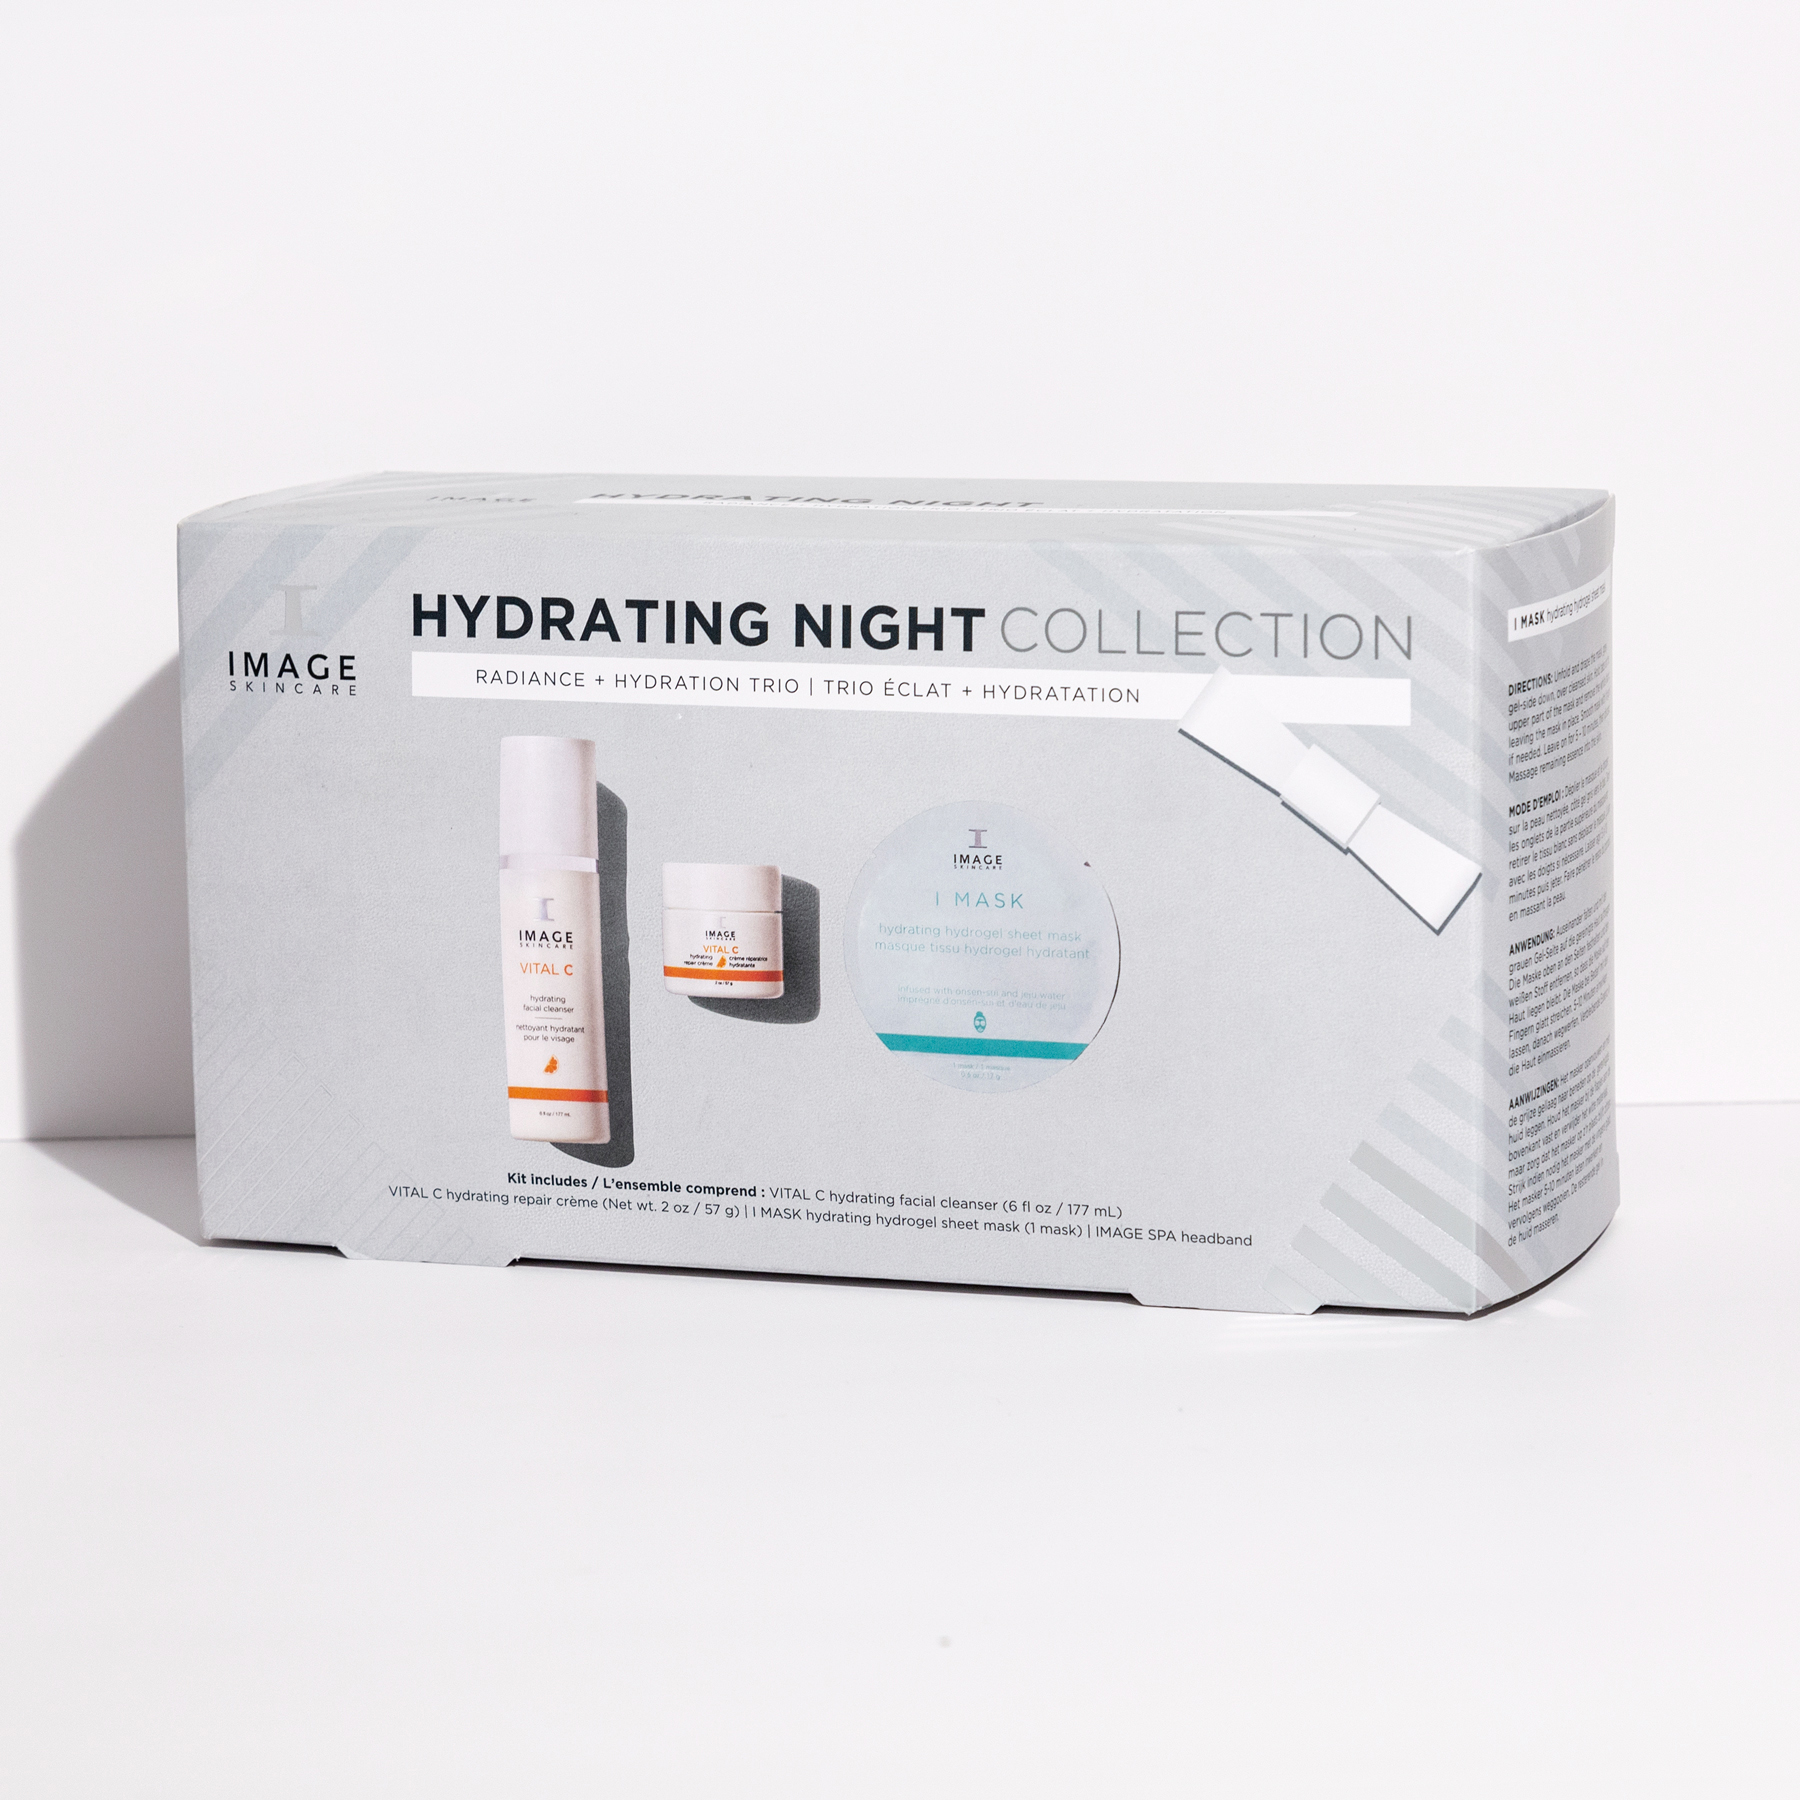 hydrating-night-collection-pdp-ro1a.jpg